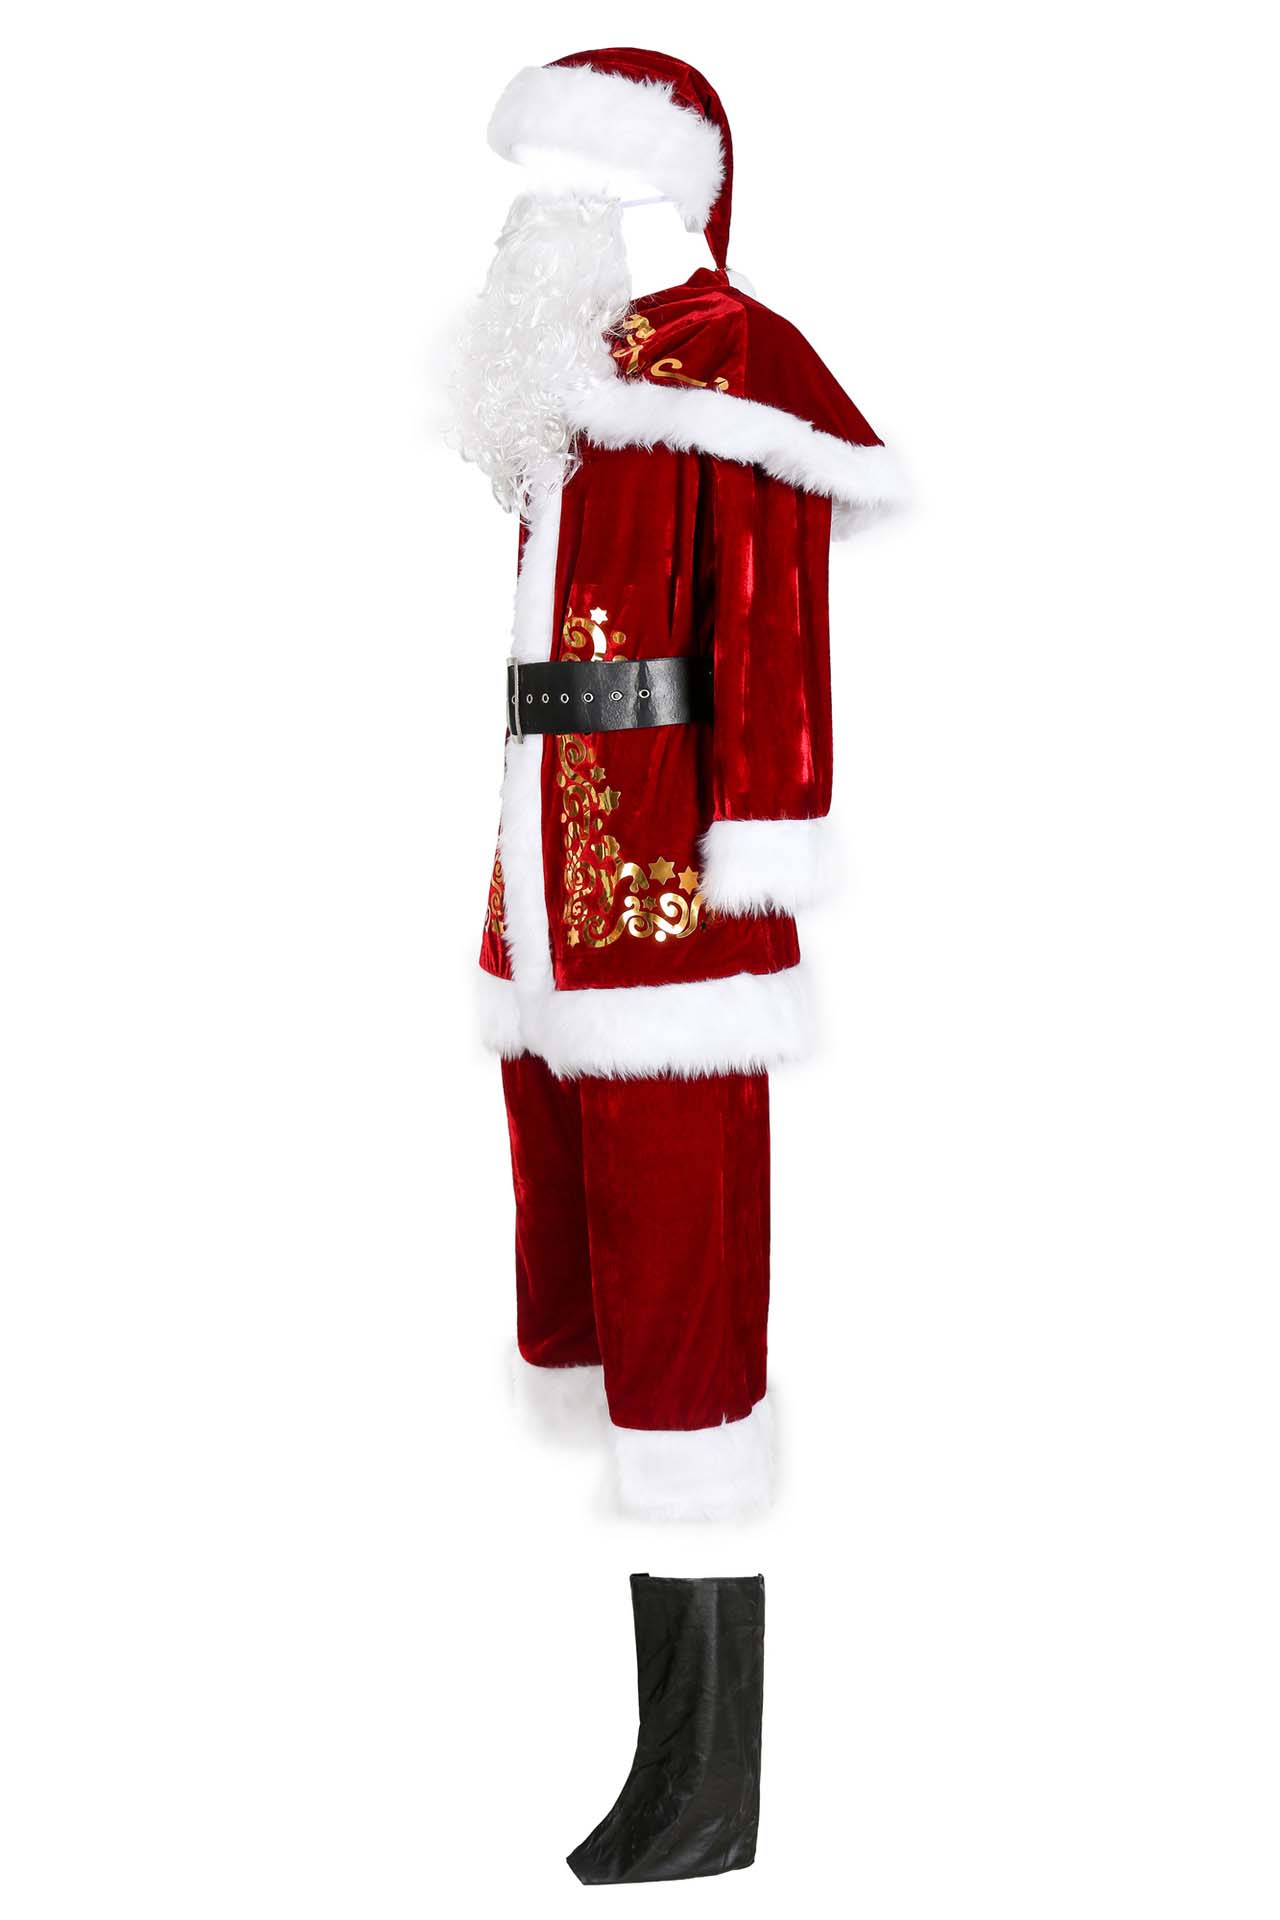 Christmas Santa Claus Costume for Adults